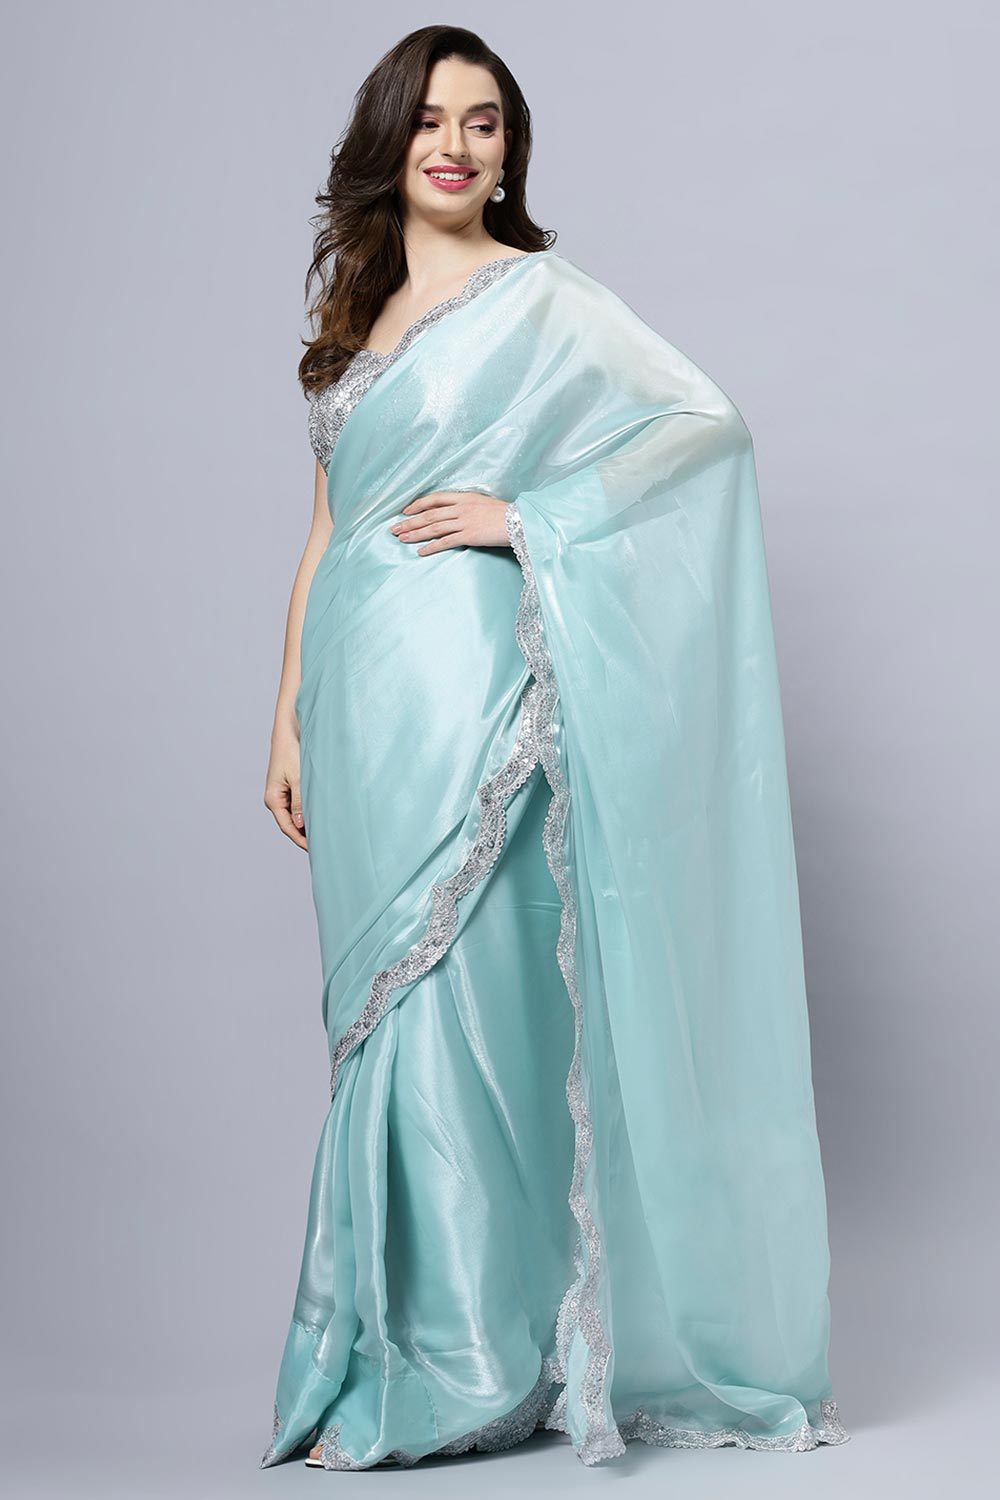 Shop Benoite Blue Soft Organza Scallop Border One Minute Saree at best offer at our  Store - One Minute Saree